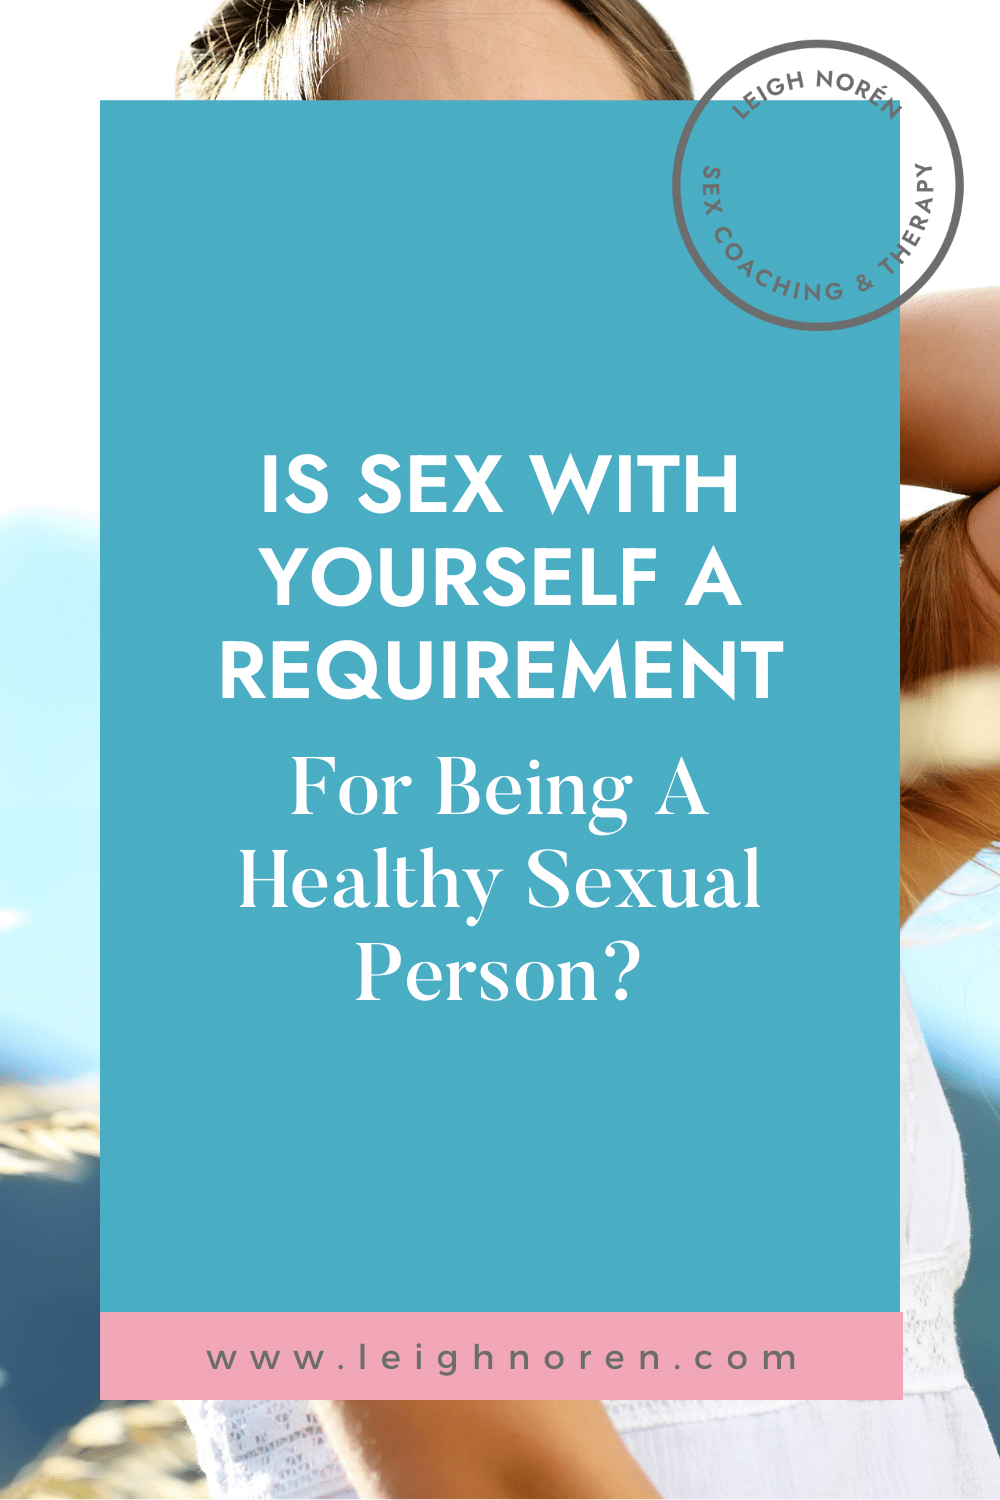 Is Sex With Yourself A Requirement For Being A Healthy Sexual Person?